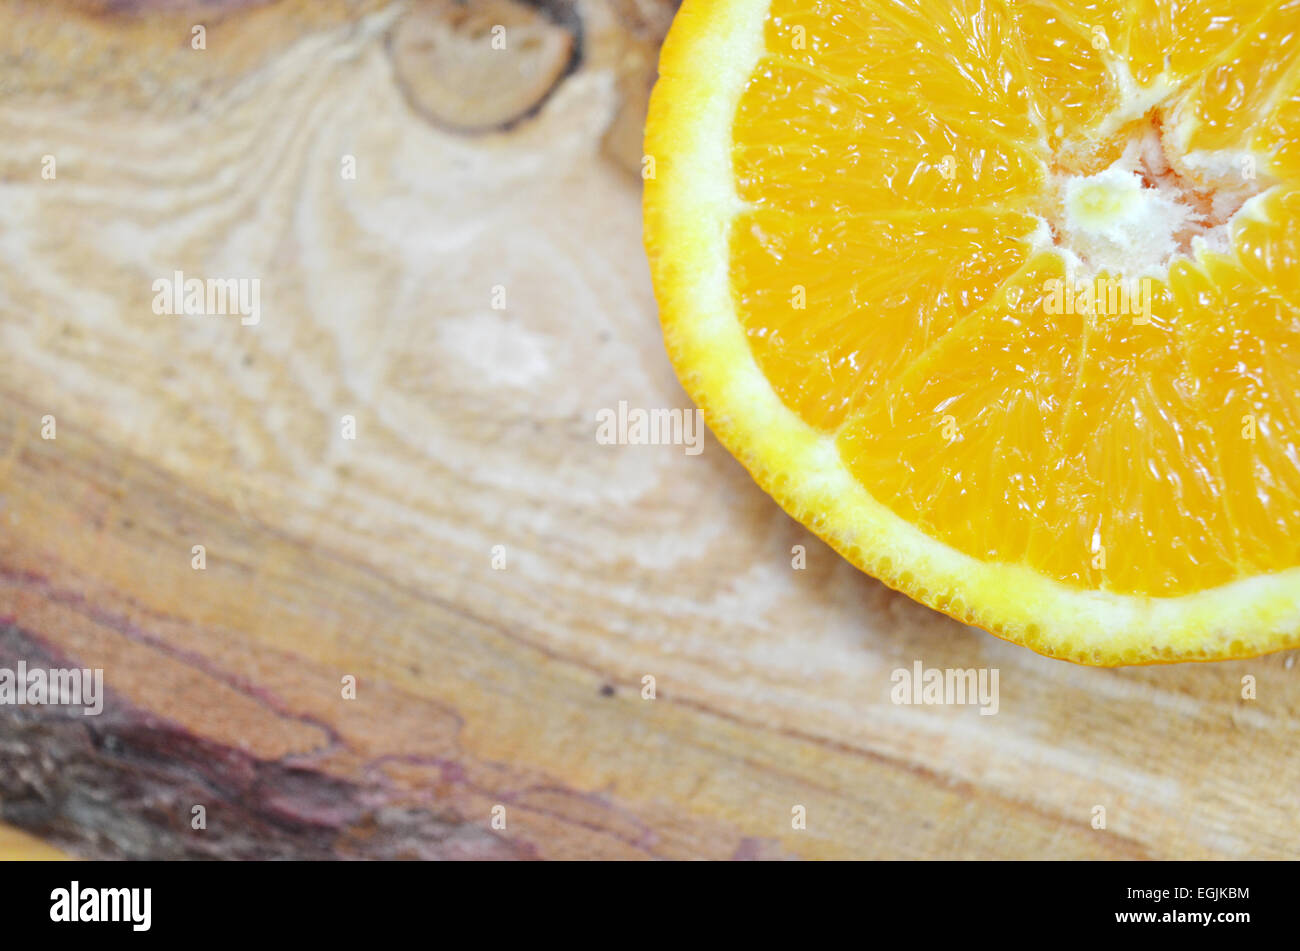 One half of an orange close up on a plank Stock Photo